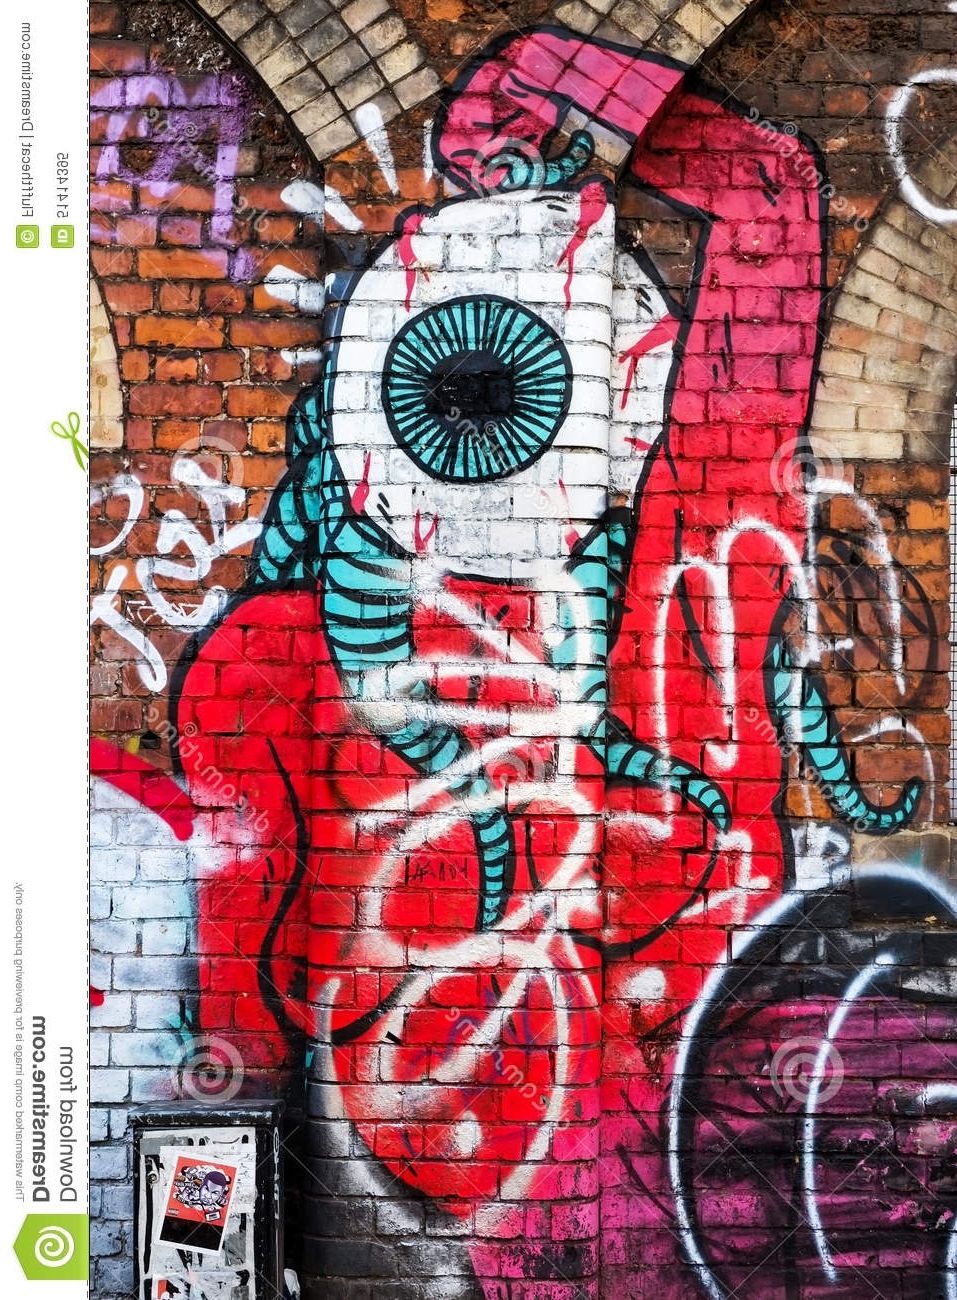 Preferred Abstract Graffiti Wall Art With Monster Creature With Big Eye, Graffiti Wall Art, London Uk (View 4 of 15)